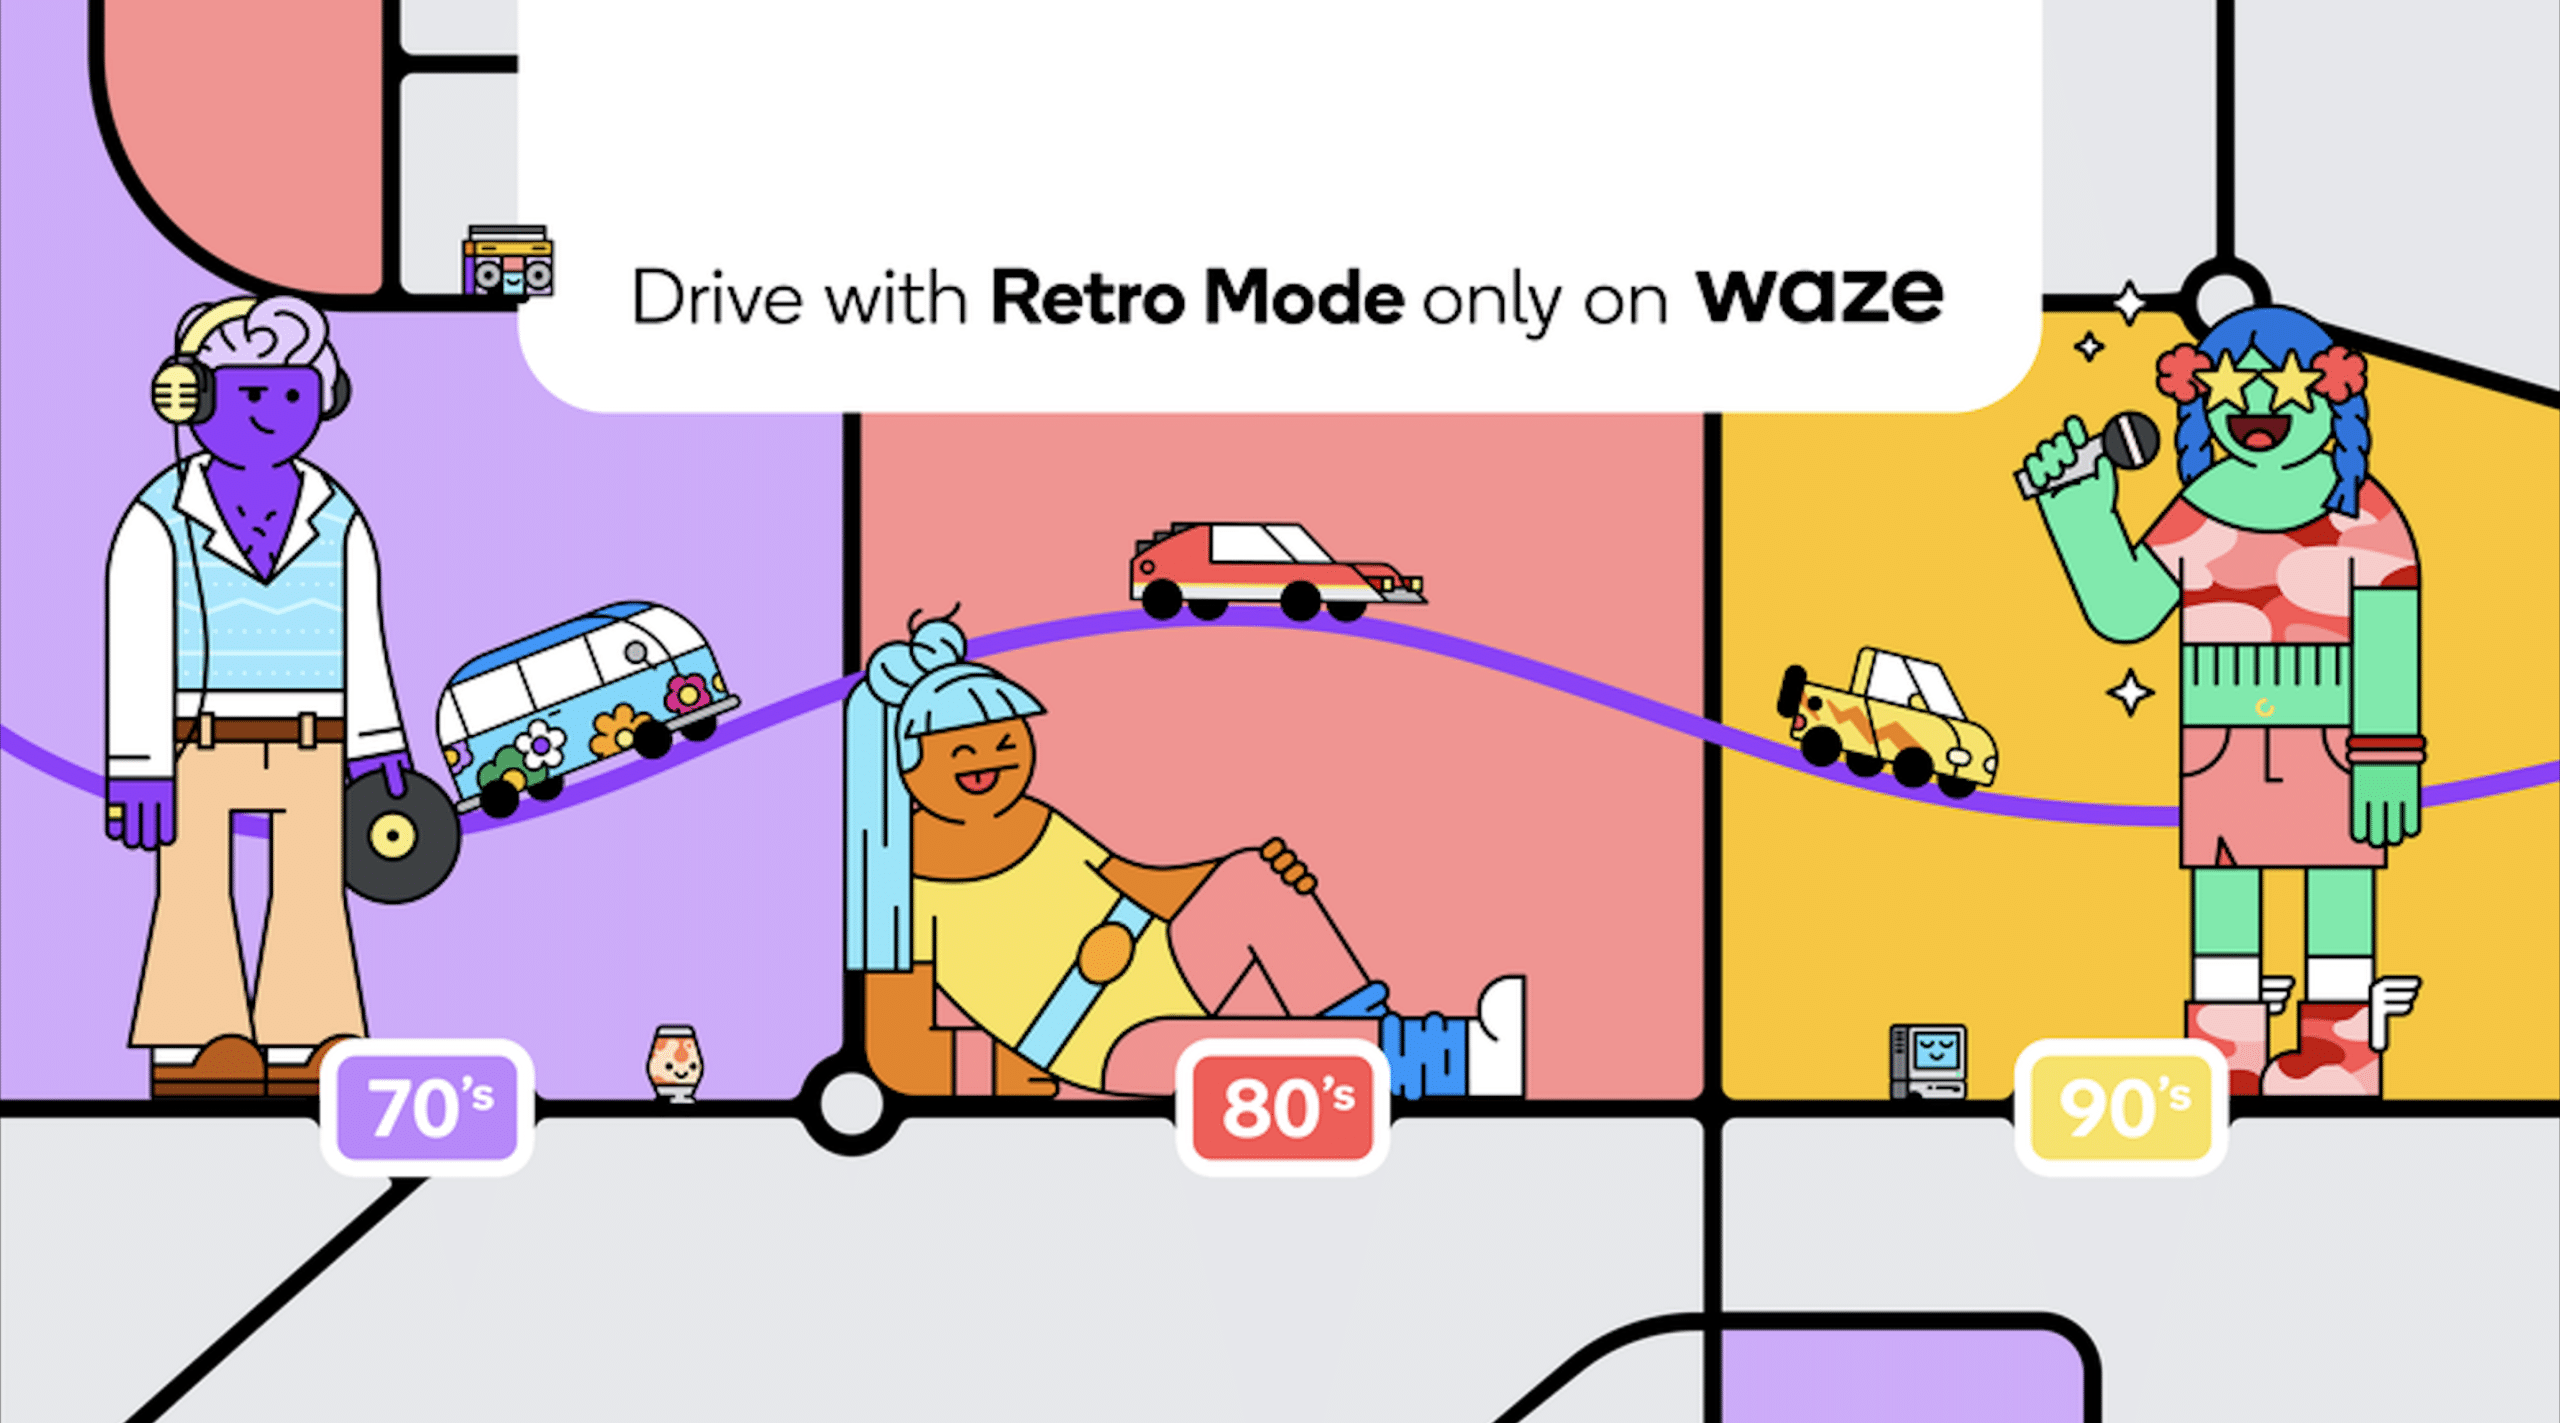 Driving and finding yourself in the 70s, 80s and 90s: it's not the time machine, it's Waze thumbnail